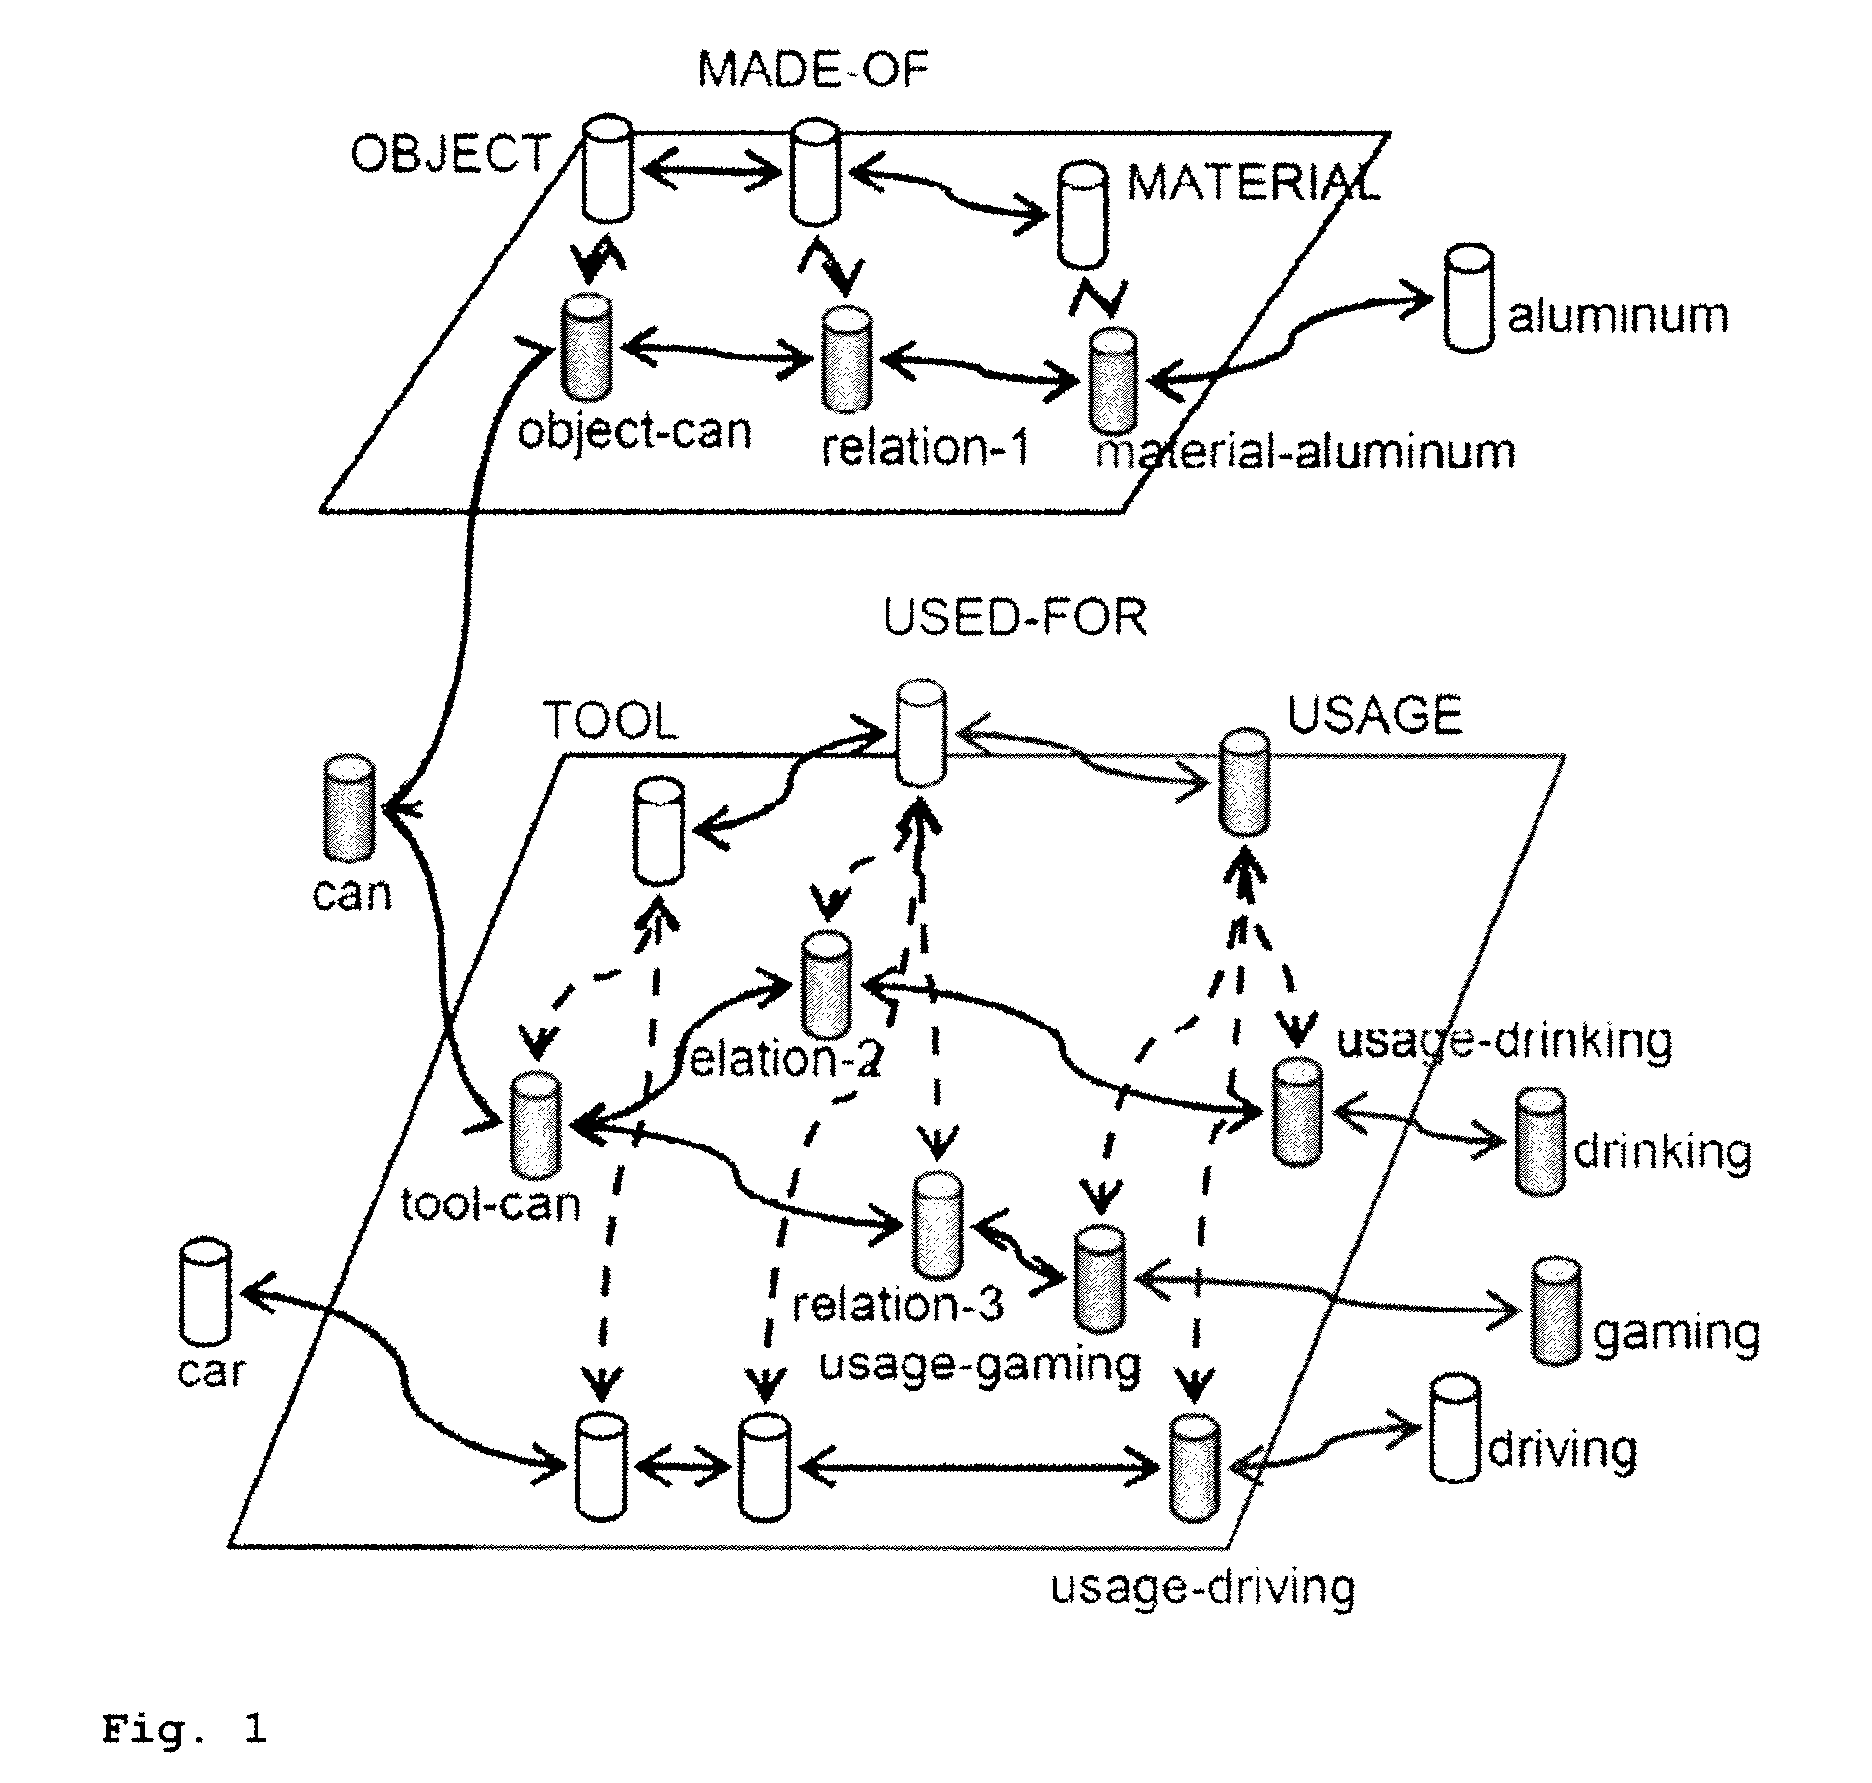 Artificial vision system and method for knowledge-based selective visual analysis